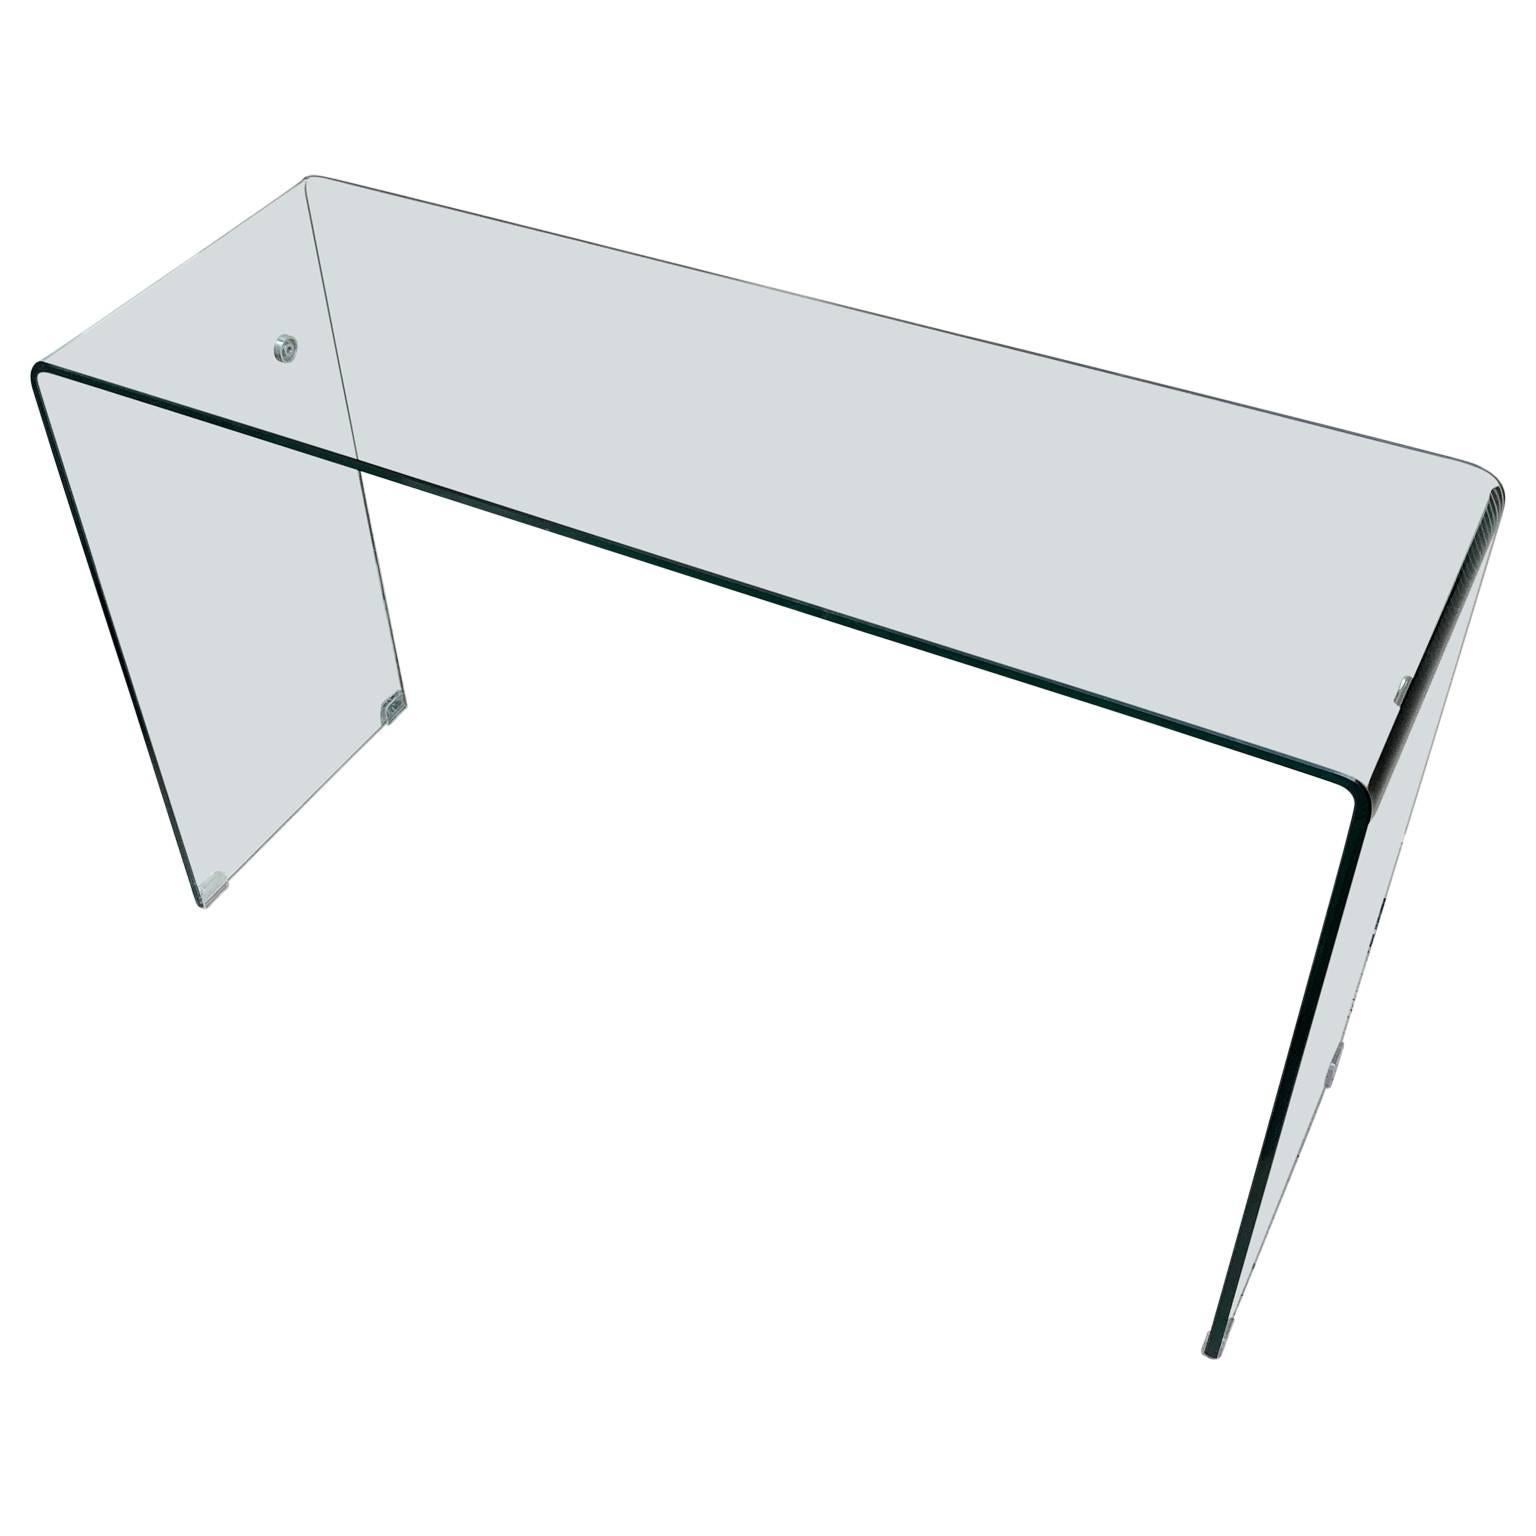 Classic modern glass console or desk.
The console has two metal fittings attached to the inside of each leg. The purpose of these fittings is unknown.

 $125 flat rate front door delivery includes Washington DC metro, Baltimore and Philadelphia